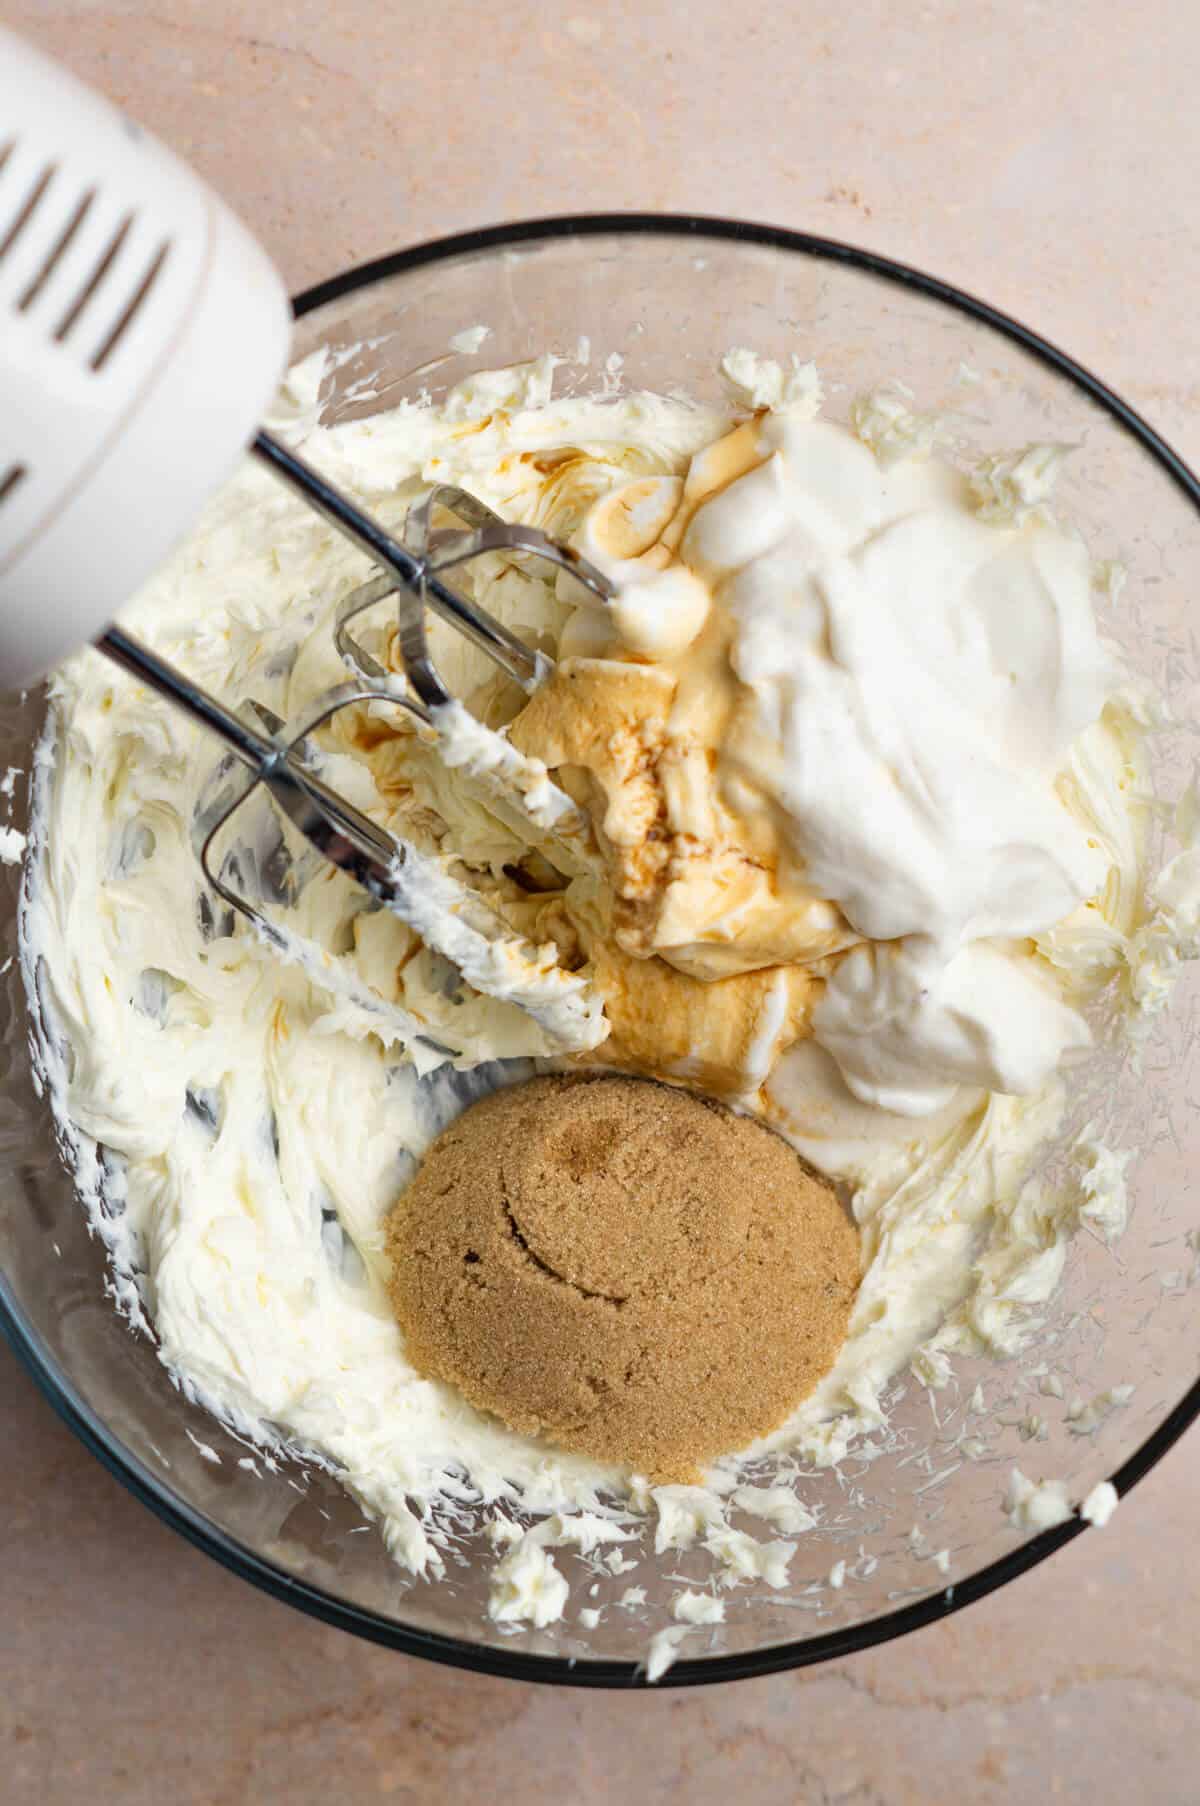 A large mixing bowl with cream cheese, vanilla Greek yogurt, brown sugar, vanilla extract, and a pinch of salt that is being mixed together with an electric hand mixer.